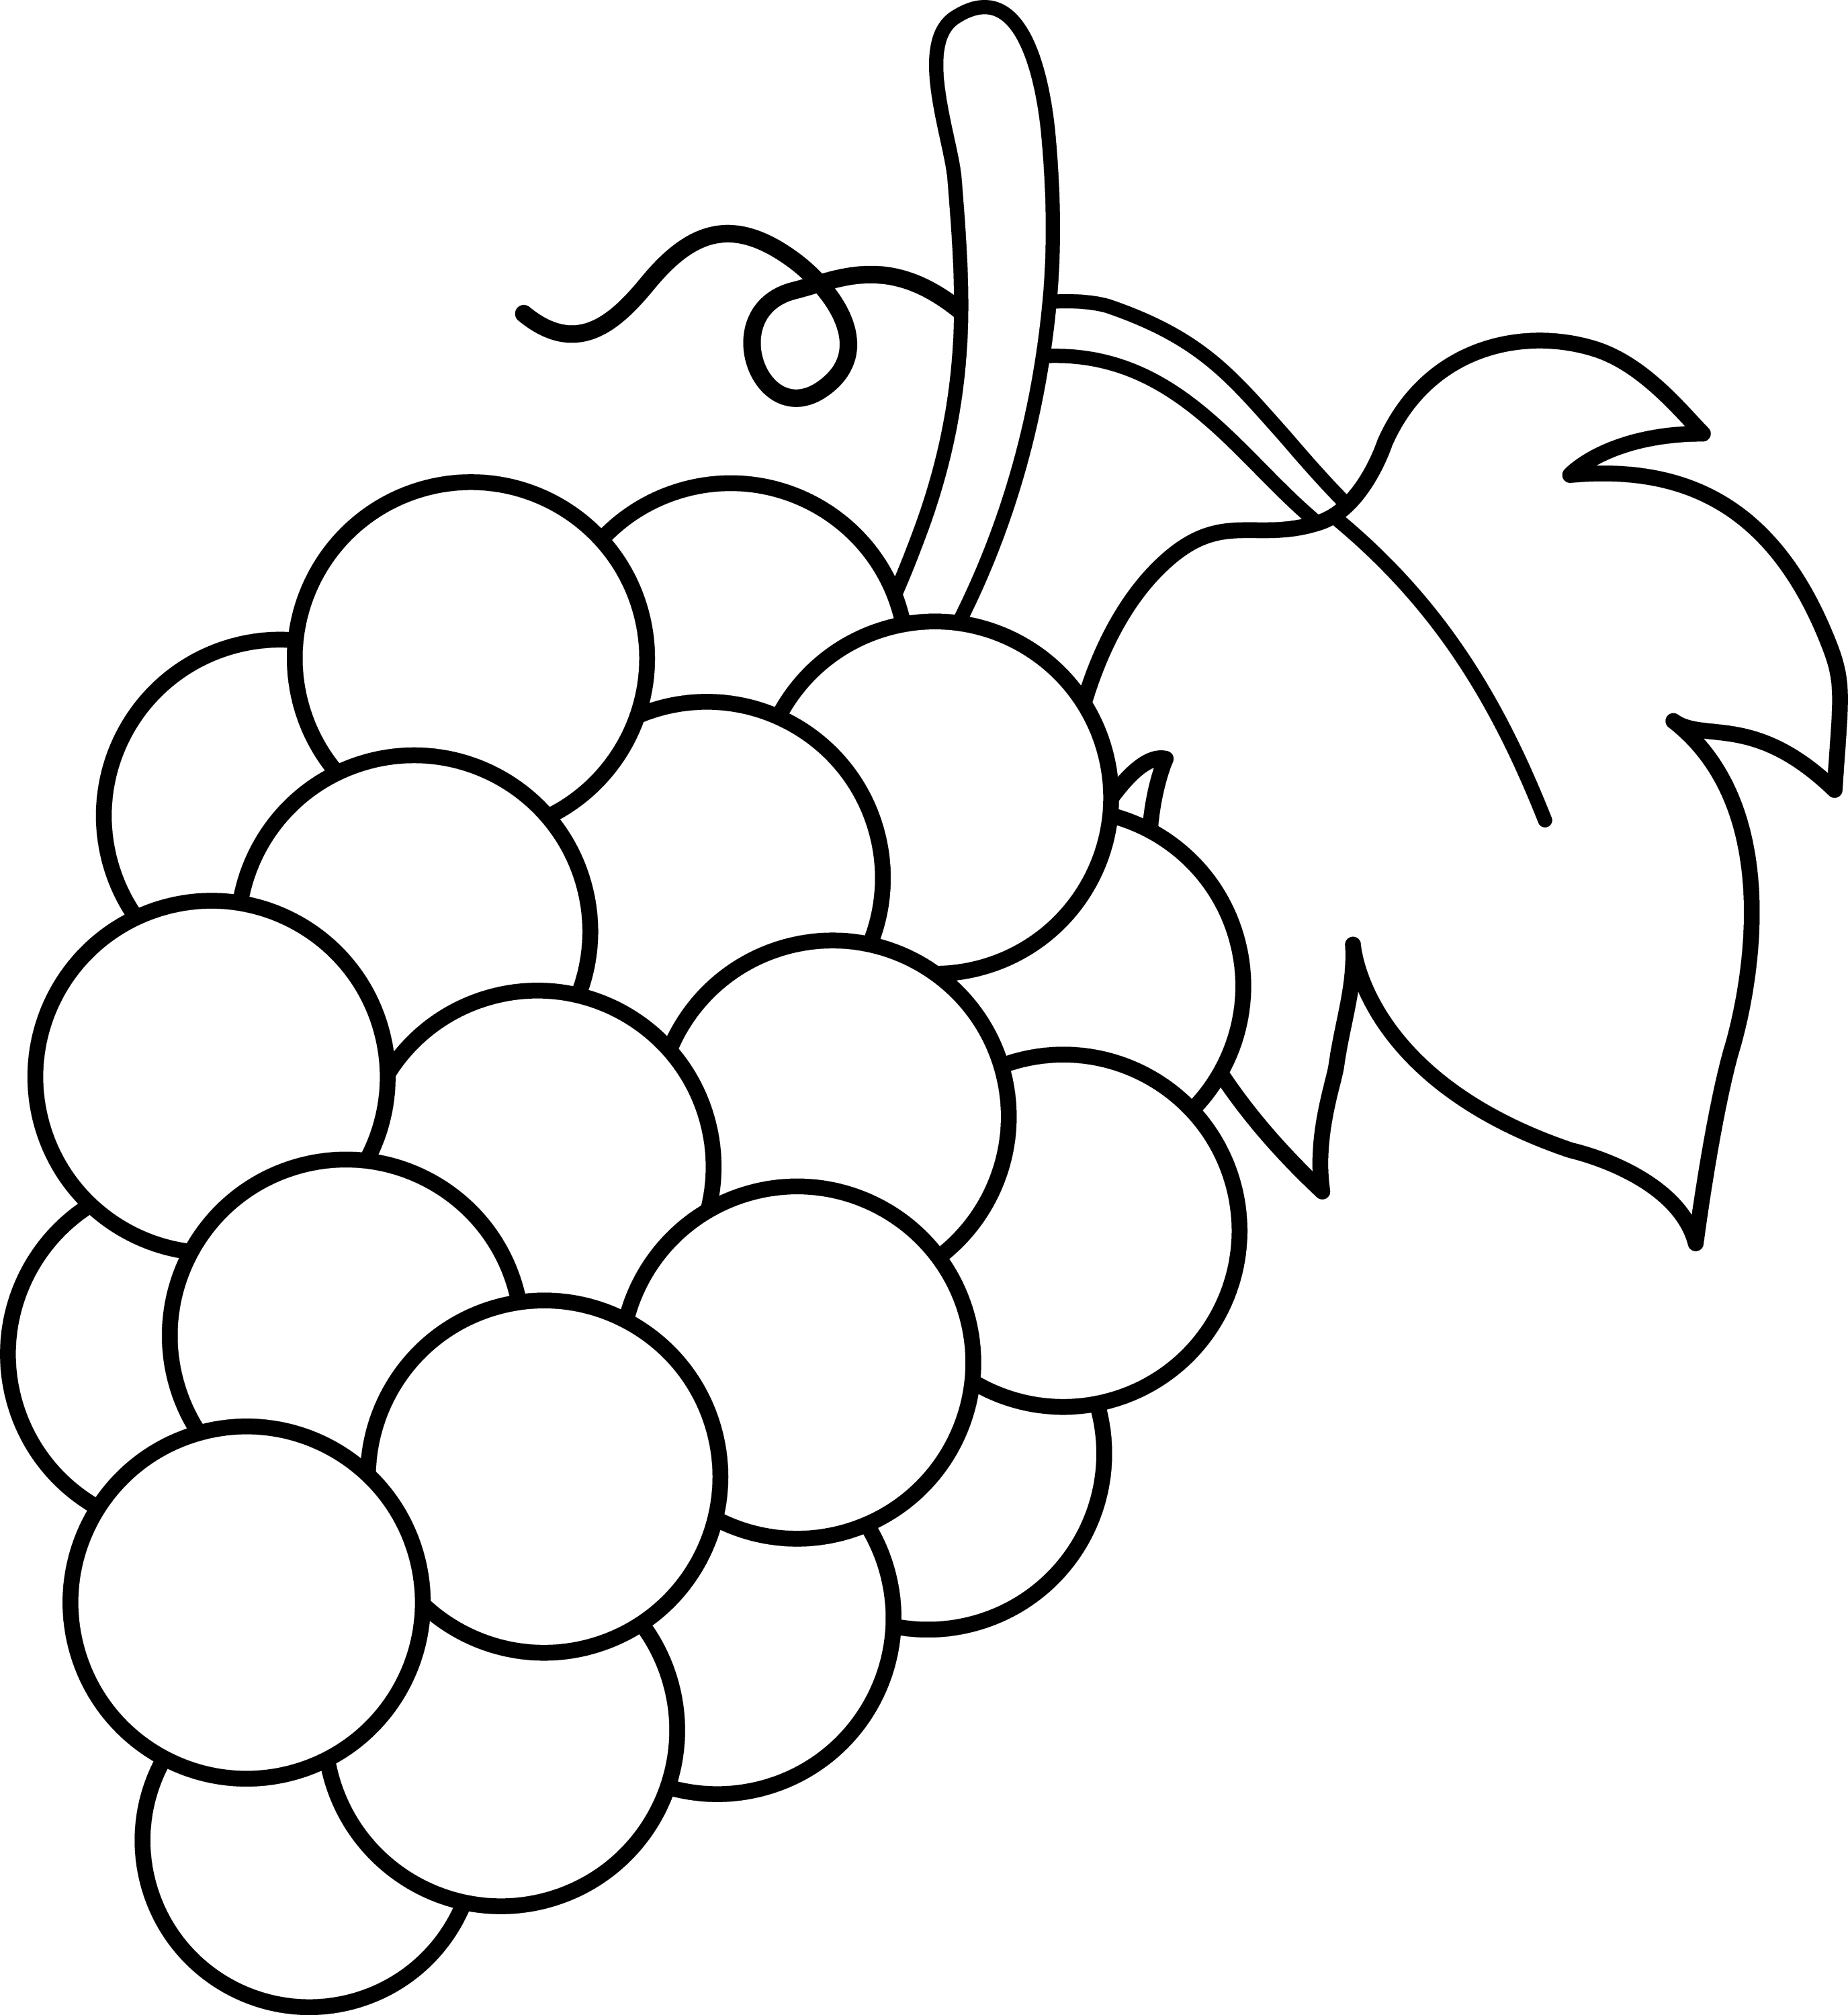 free clipart grapes black and white - photo #46